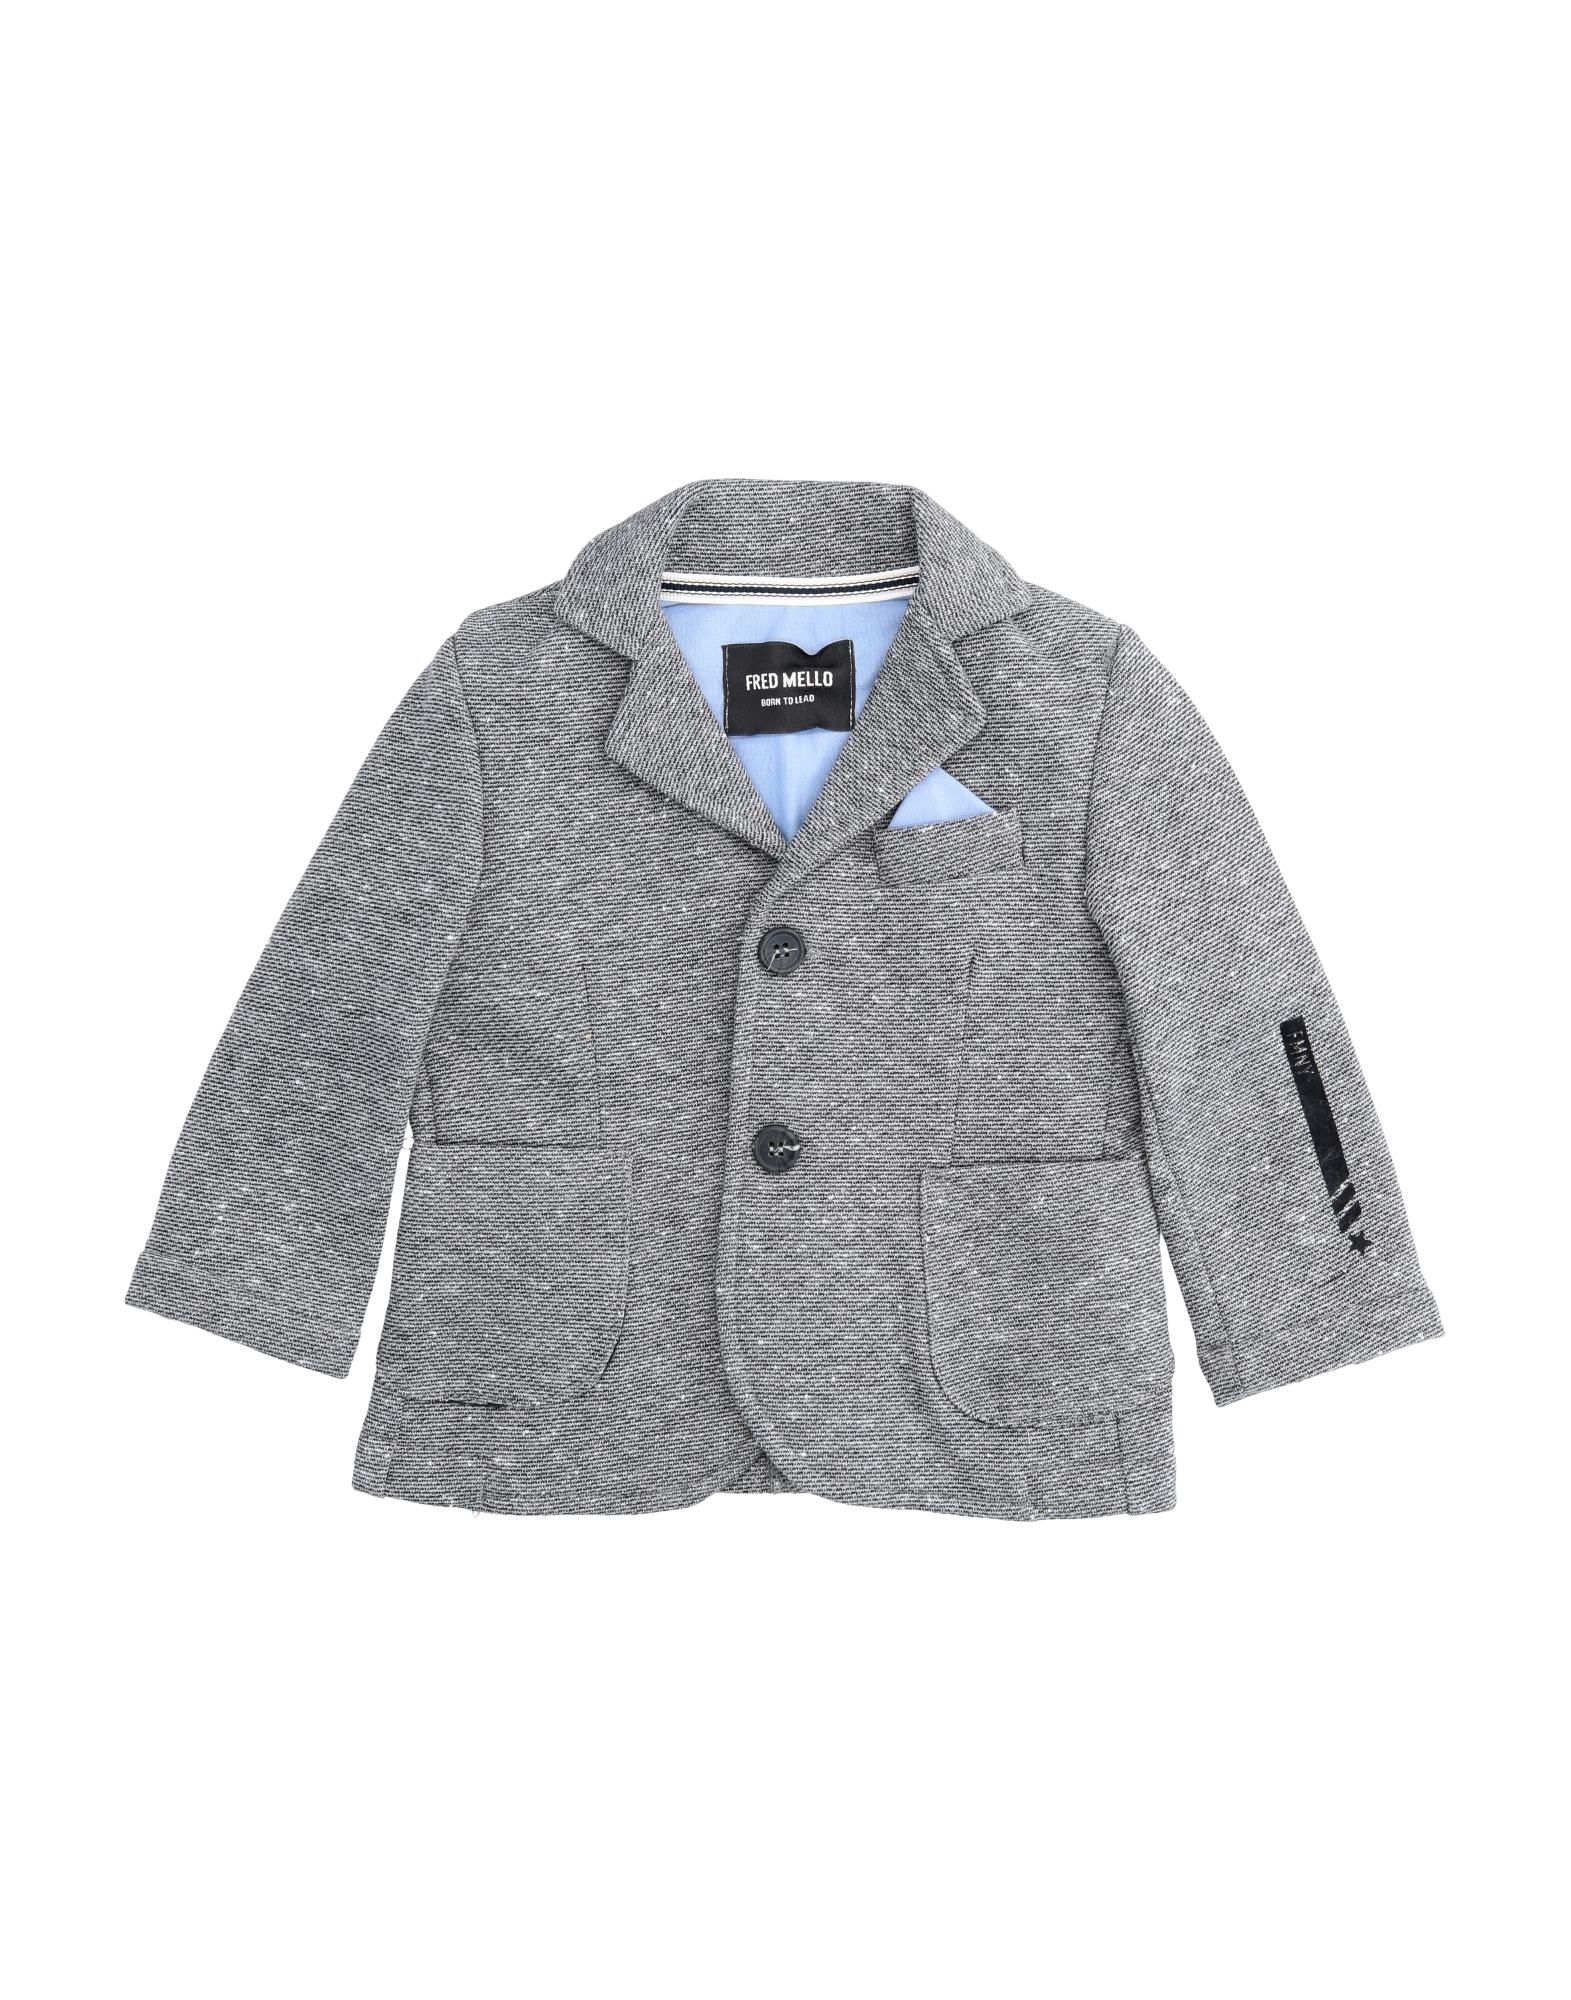 Fred Mello Kids' Suit Jackets In Grey